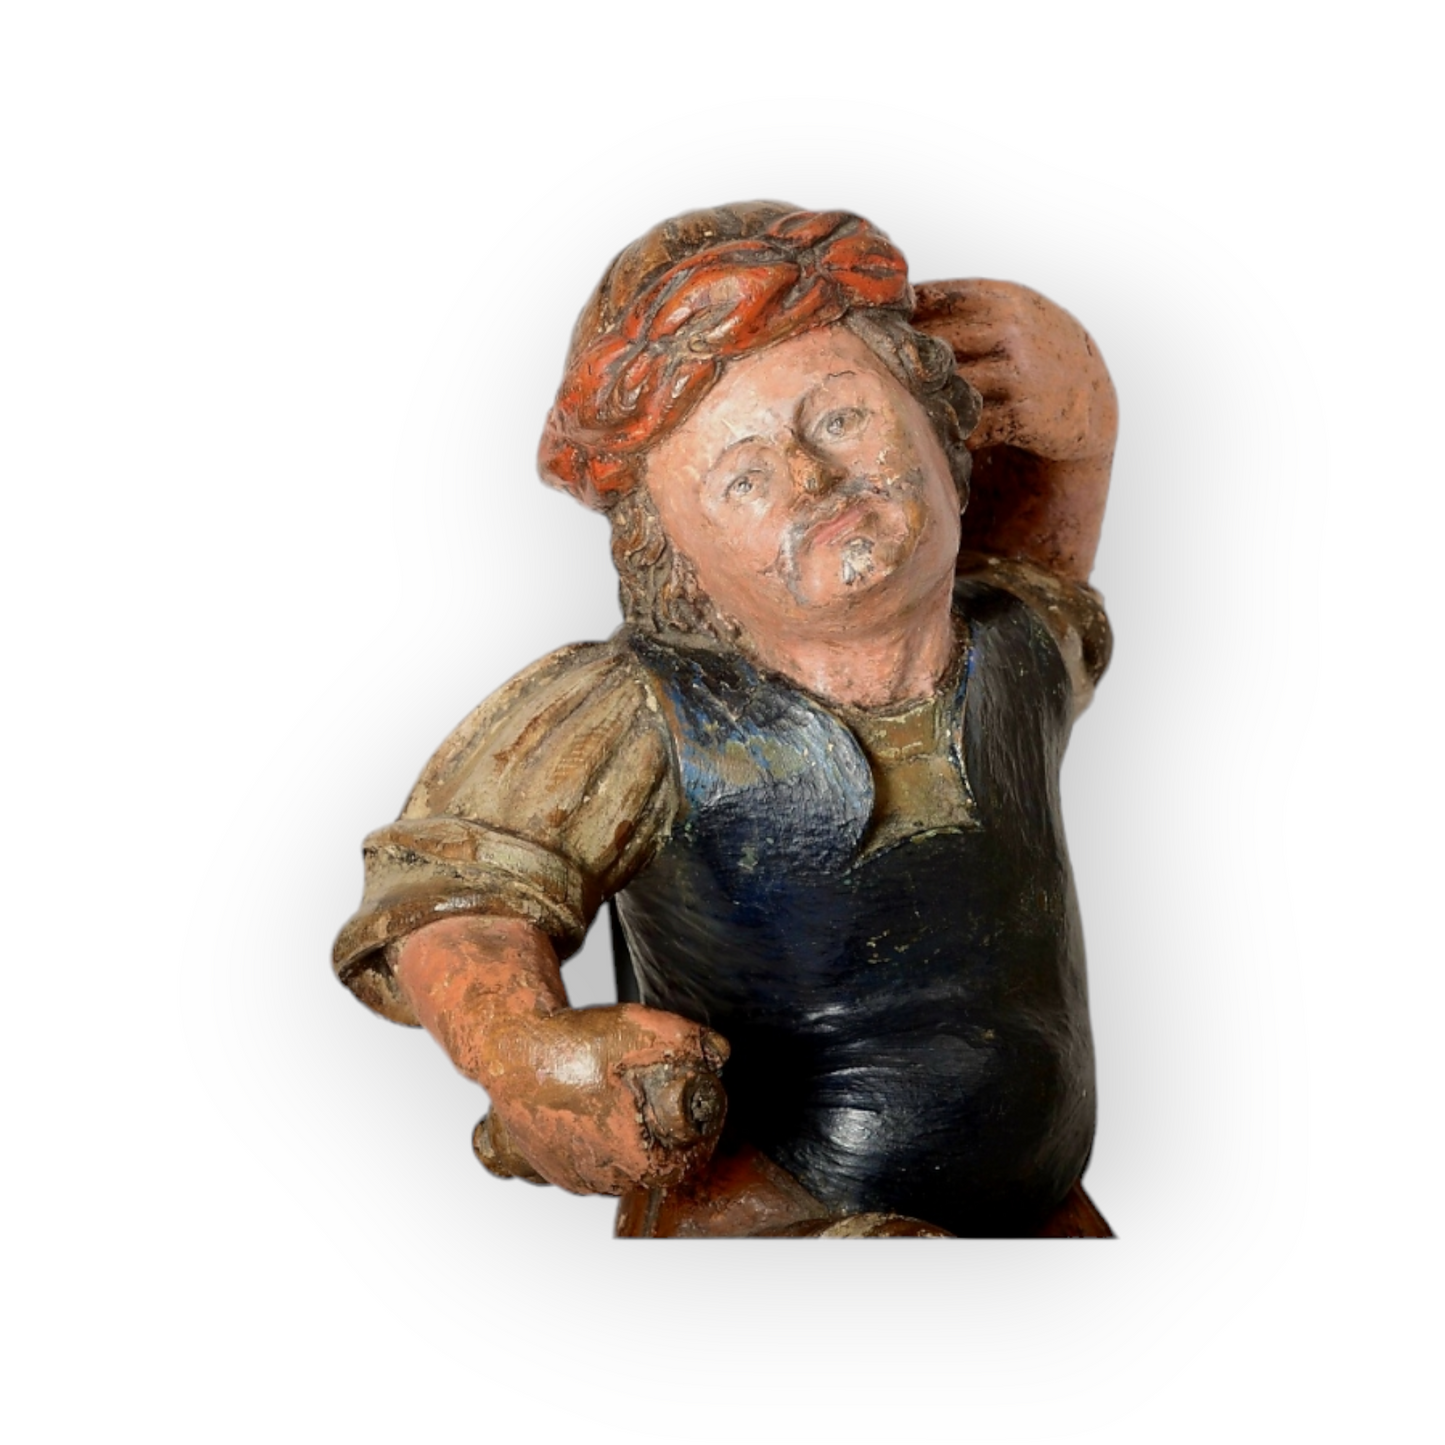 A Late 16thC / Early 17thC Decorative Italian Antique Carved Walnut Sculpture of a Male Figure in Original Polychromy